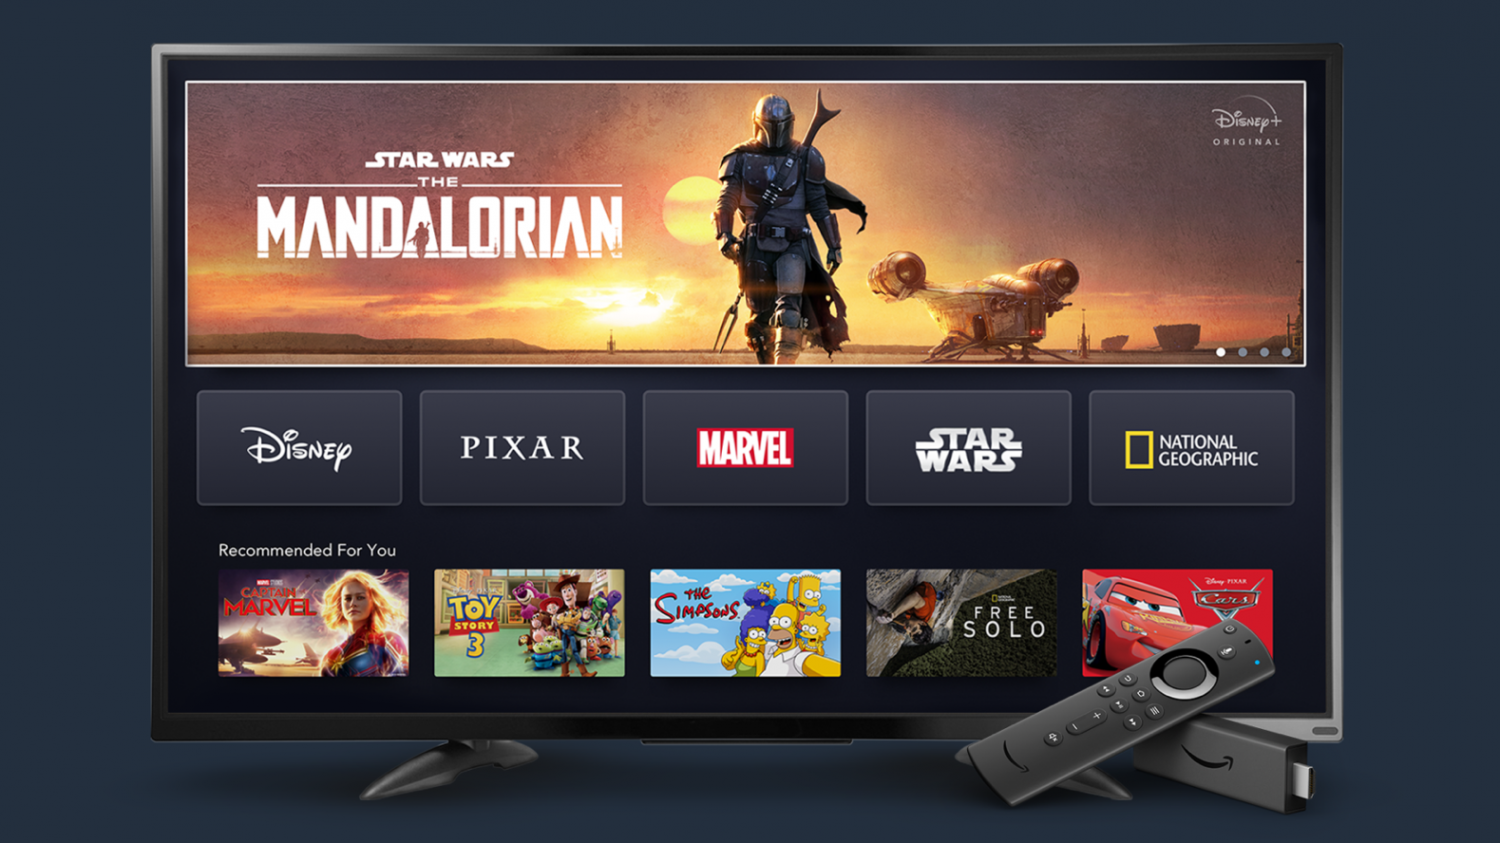 Disney+ Now Available on Fire TV